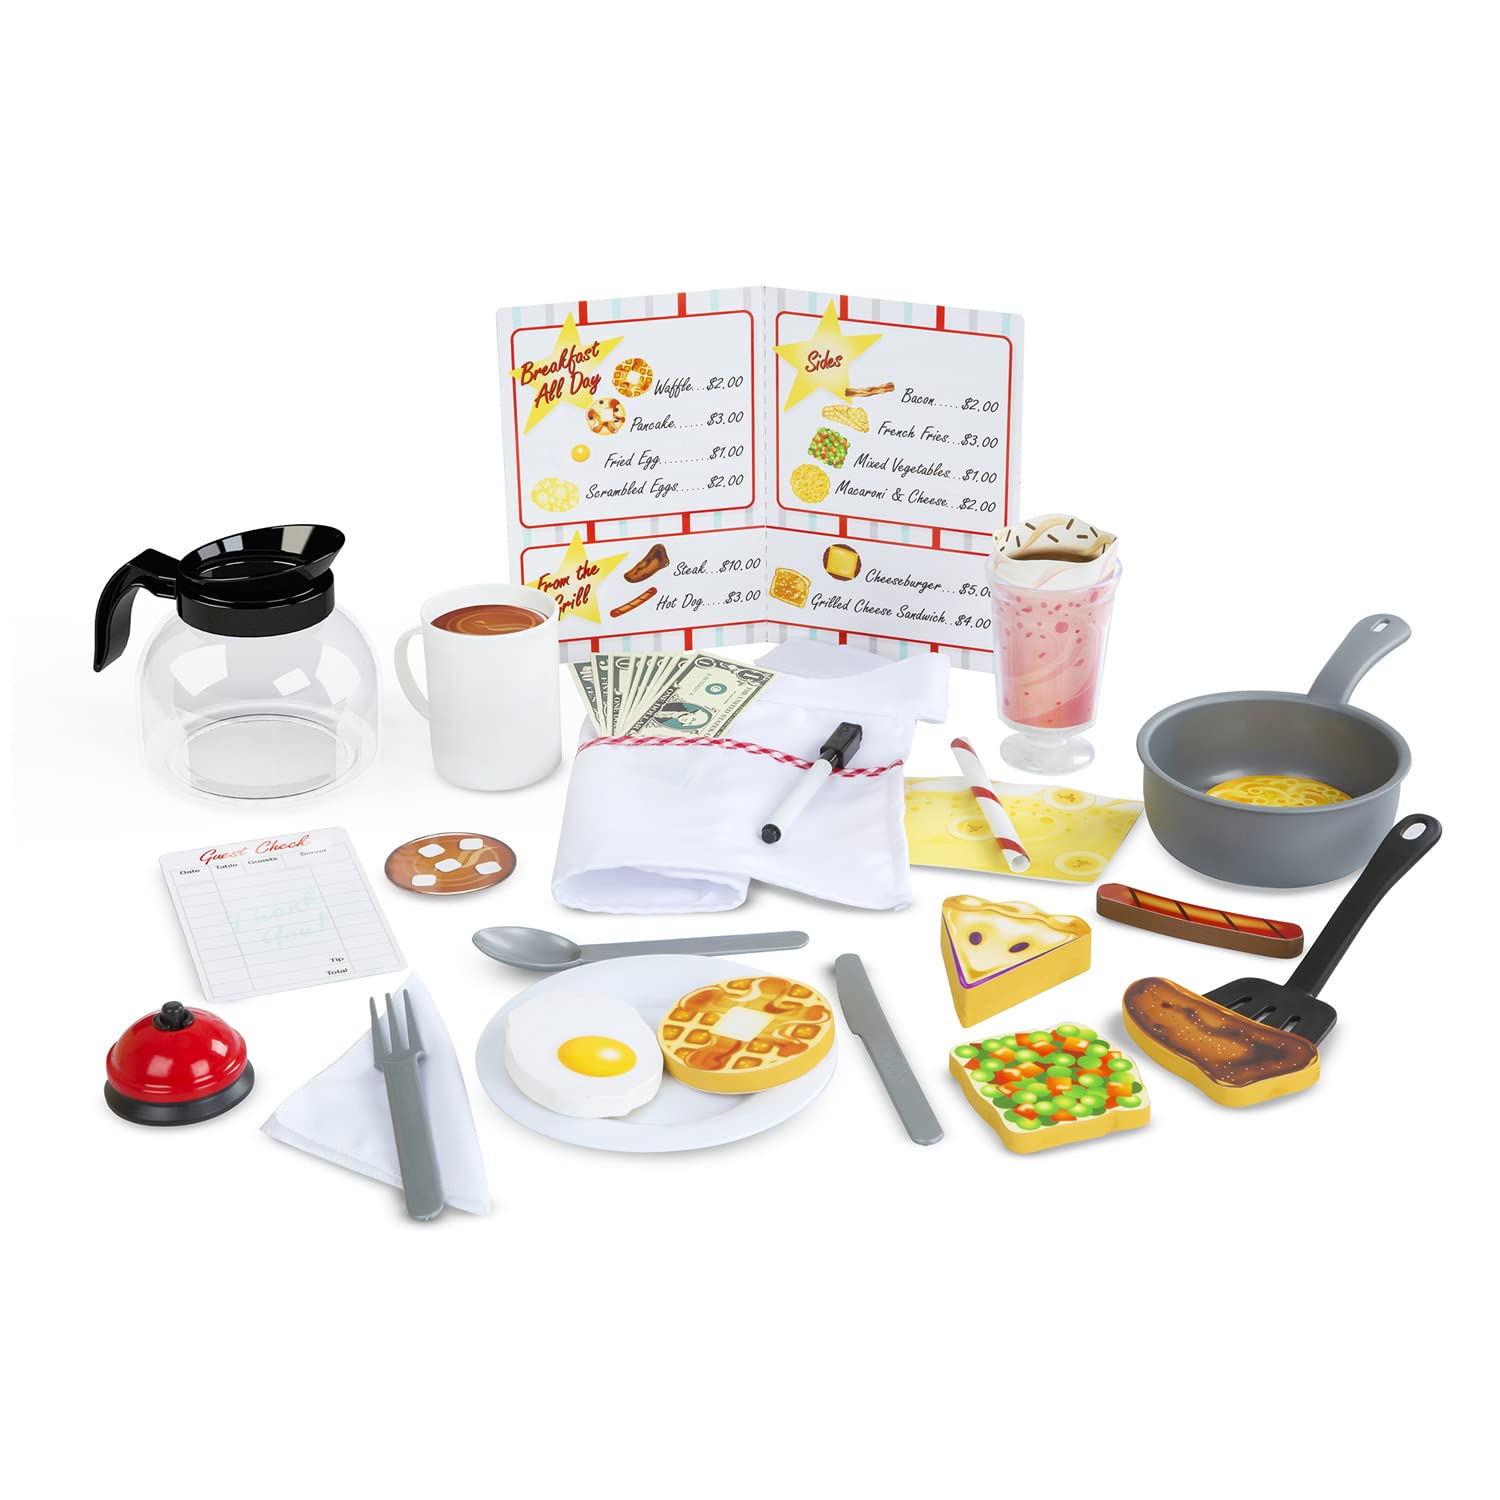 Melissa & Doug Star Diner Restaurant Play Set (41 pcs) - Pretend Play Food, Restaurant Toy Set With Cookware, Utensils For Kids, Diner Playset for Kids And Toddlers, Ages 3+